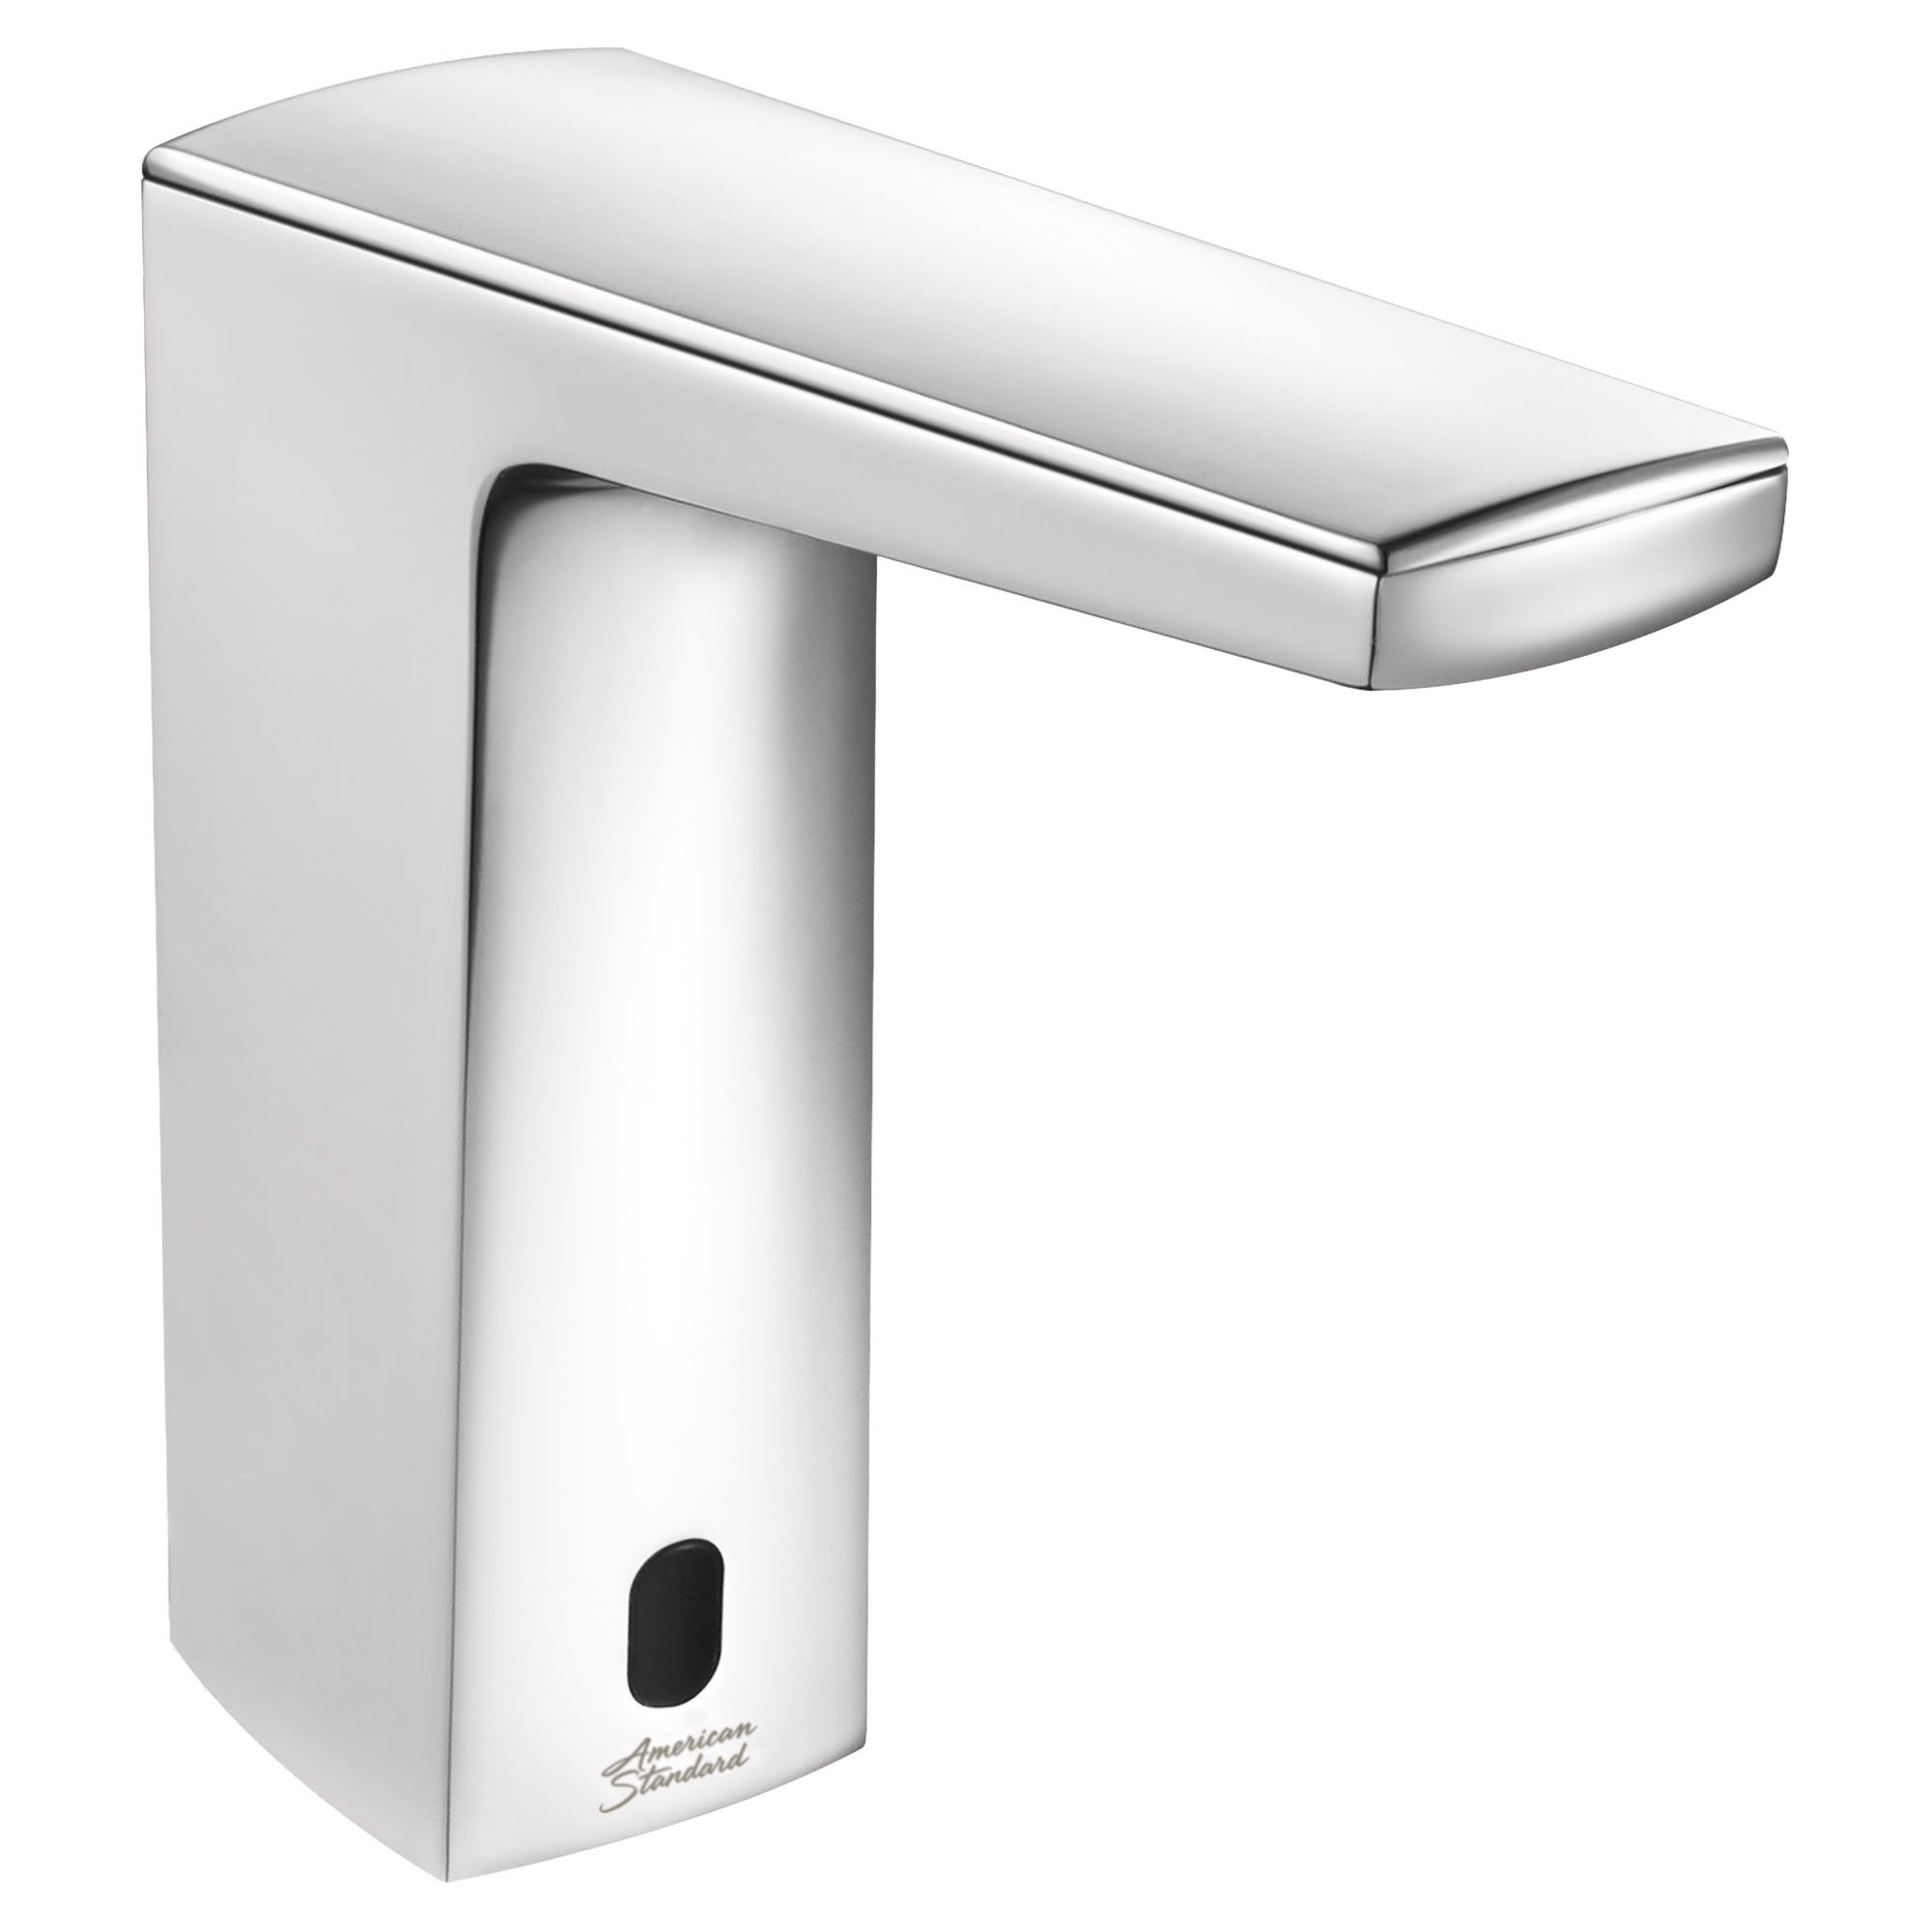 Paradigm™ Selectronic™ Touchless Faucet, Battery-Powered With Above-Deck Mixing, 0.5 gpm/1.9 Lpm